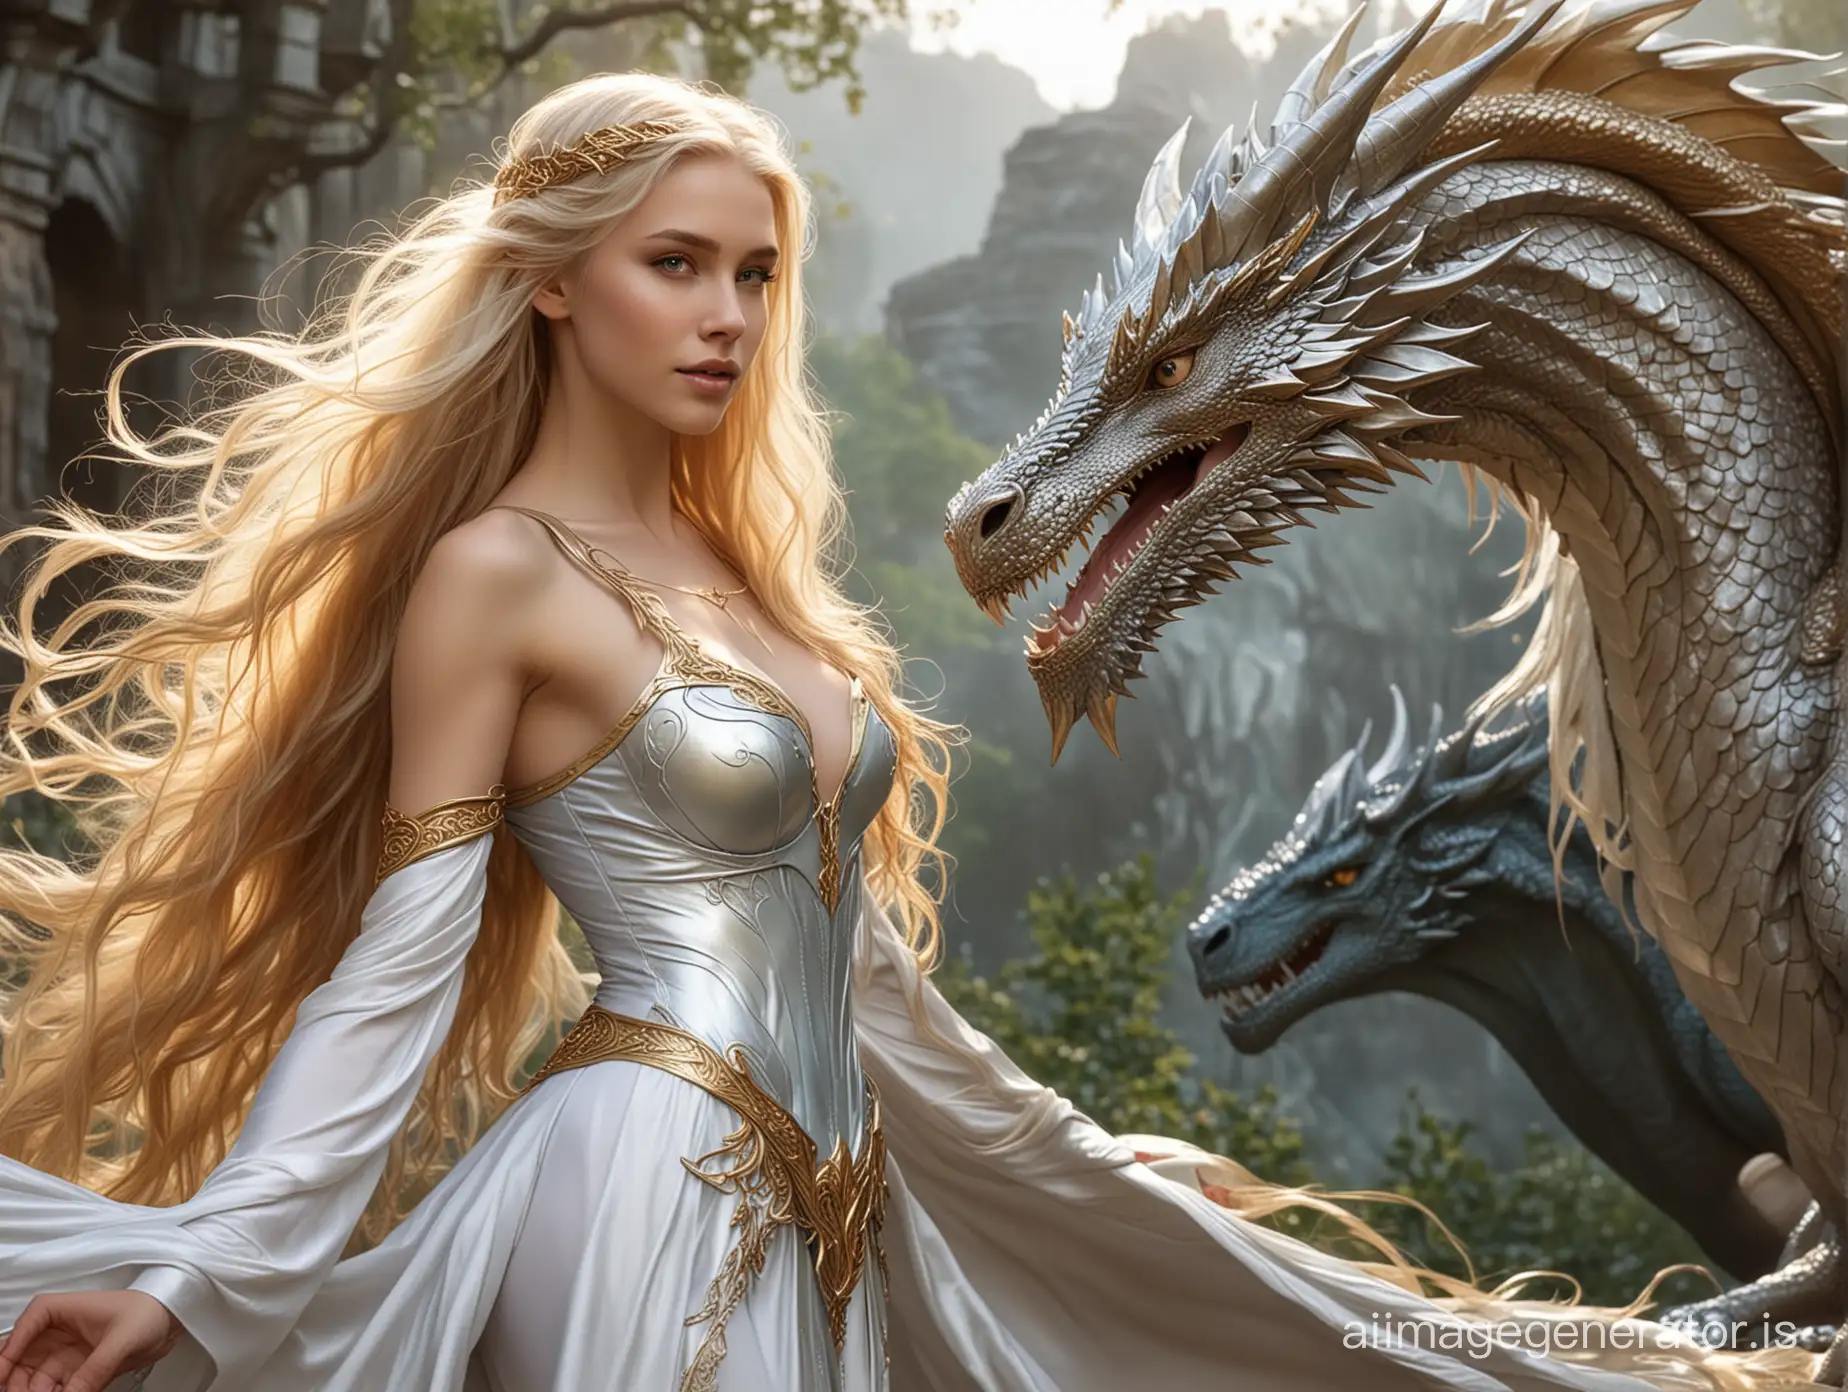 Elven-Princess-with-Silver-Dragon-Fantasy-Art-Depicting-a-Regal-Figure-and-Her-Mythical-Companion